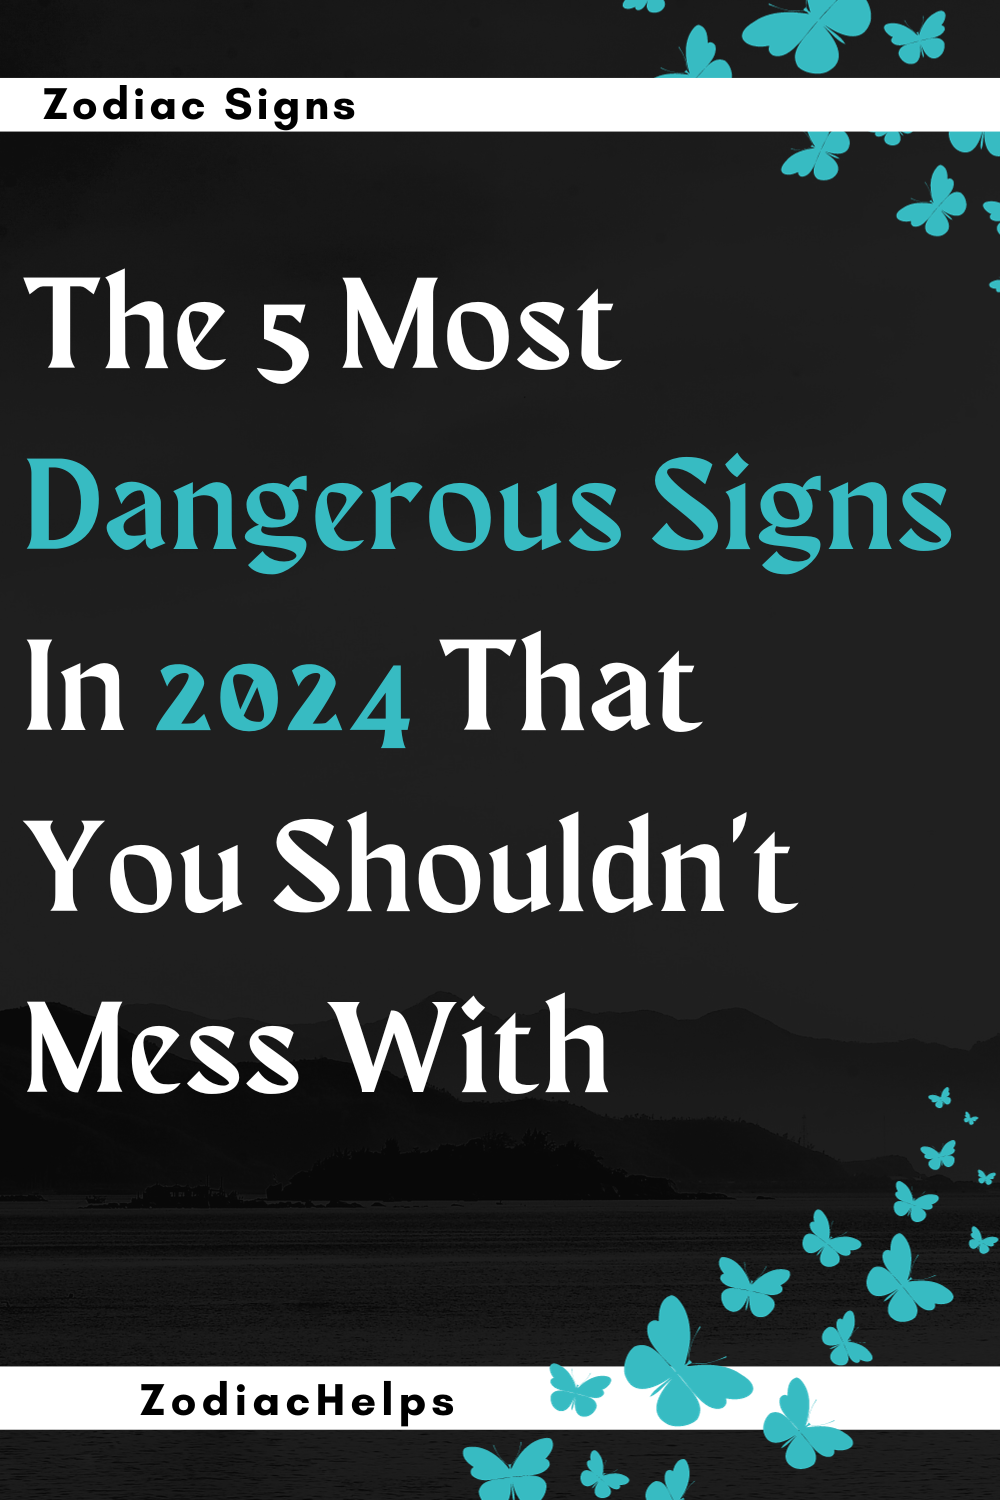 The 5 Most Dangerous Signs In 2024 That You Shouldn't Mess With